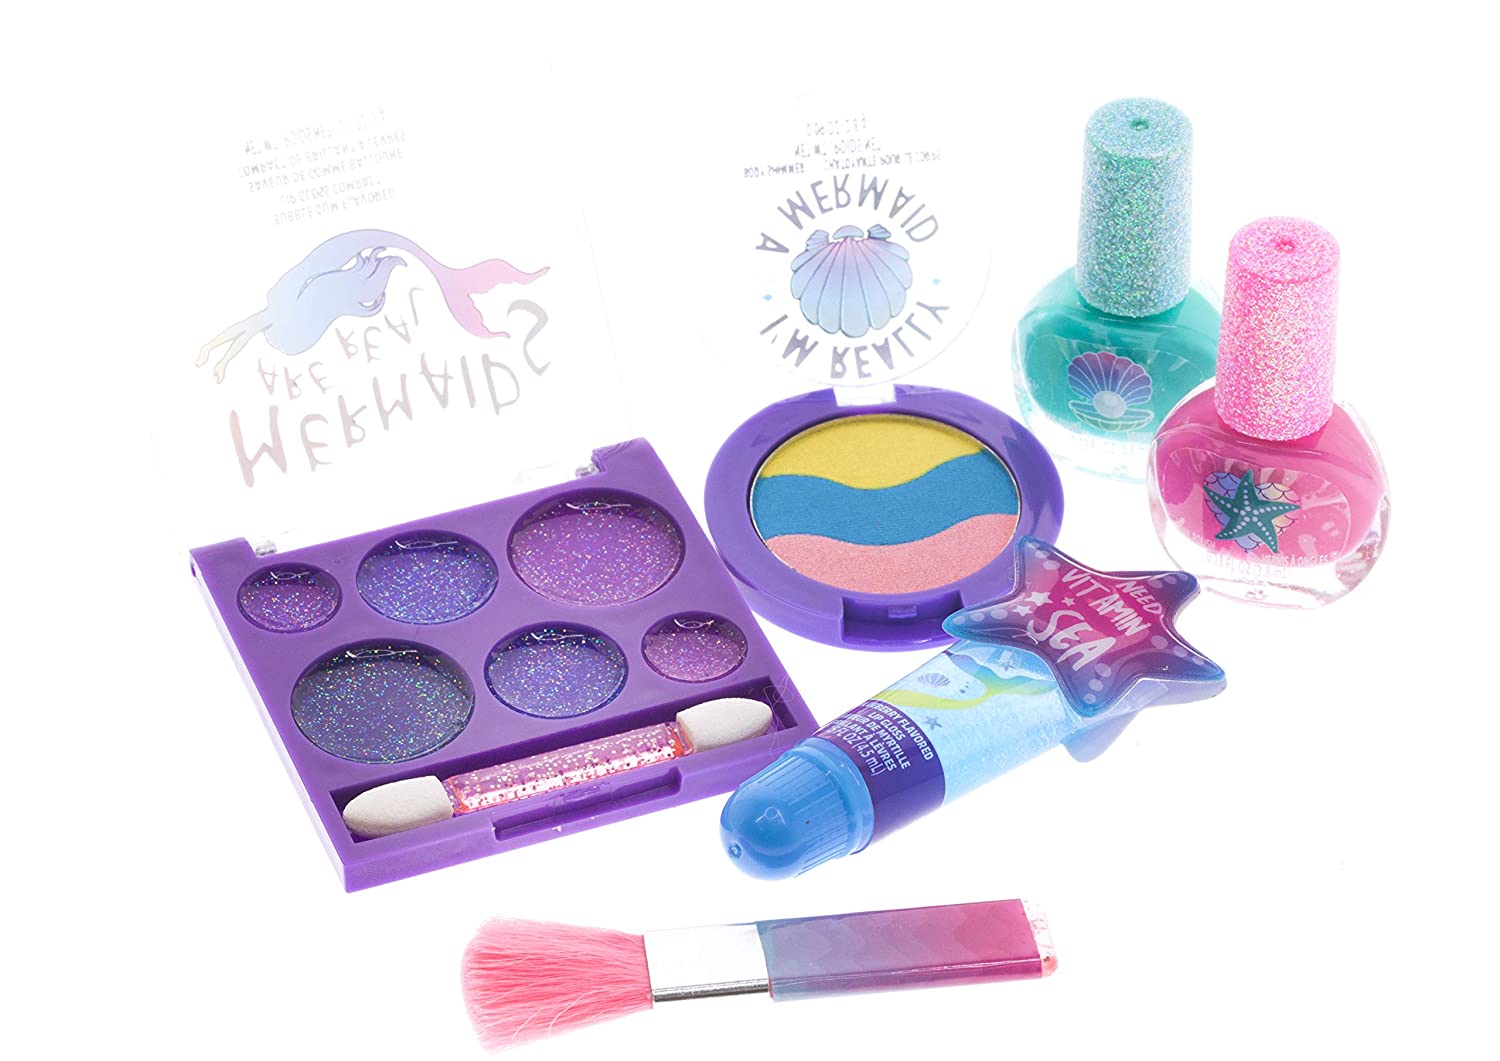 Townley Girl Mermaid Vibes Makeup Set with 8 Pieces, Including Lip Gloss, Nail Polish, Body Shimmer and More in Mermaid Bag, Ages 3+ for Parties, Sleepovers and Makeovers